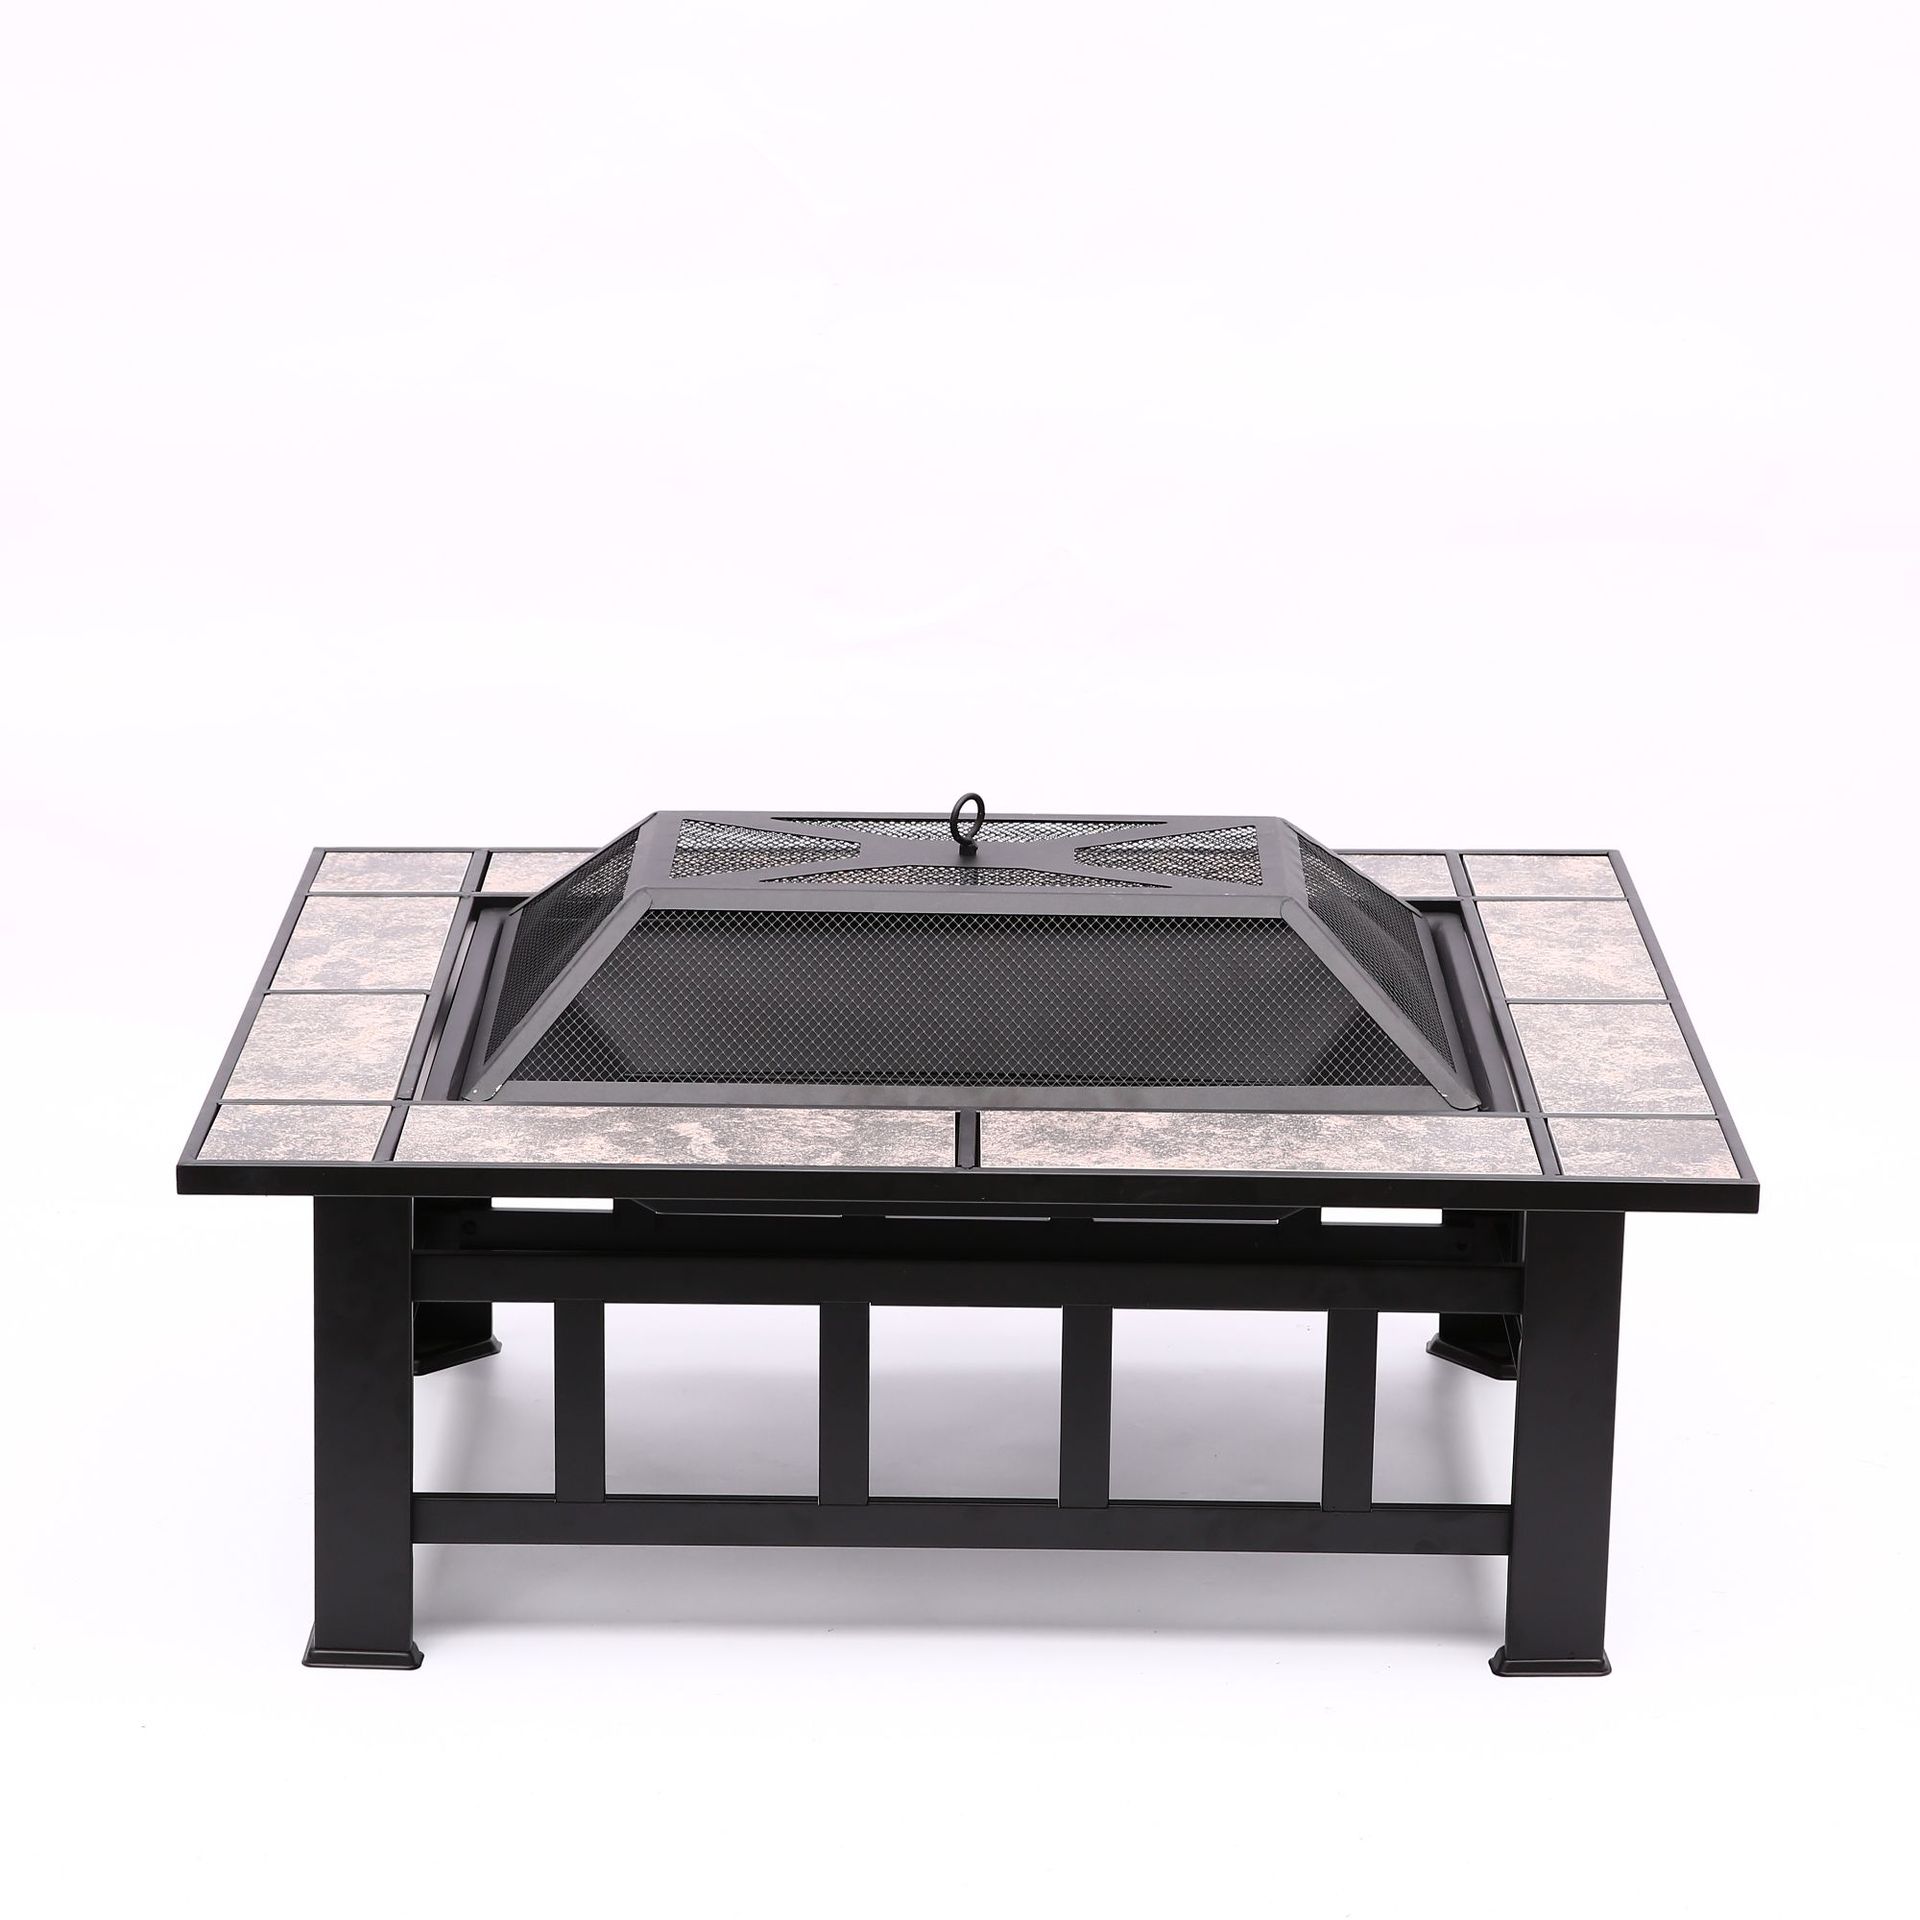 Outdoor Square Barbecue Stove Charcoal Heating Brazier Barbecue Table Household Carbon Oven Barbecue Stove Courtyard Barbecue Stove